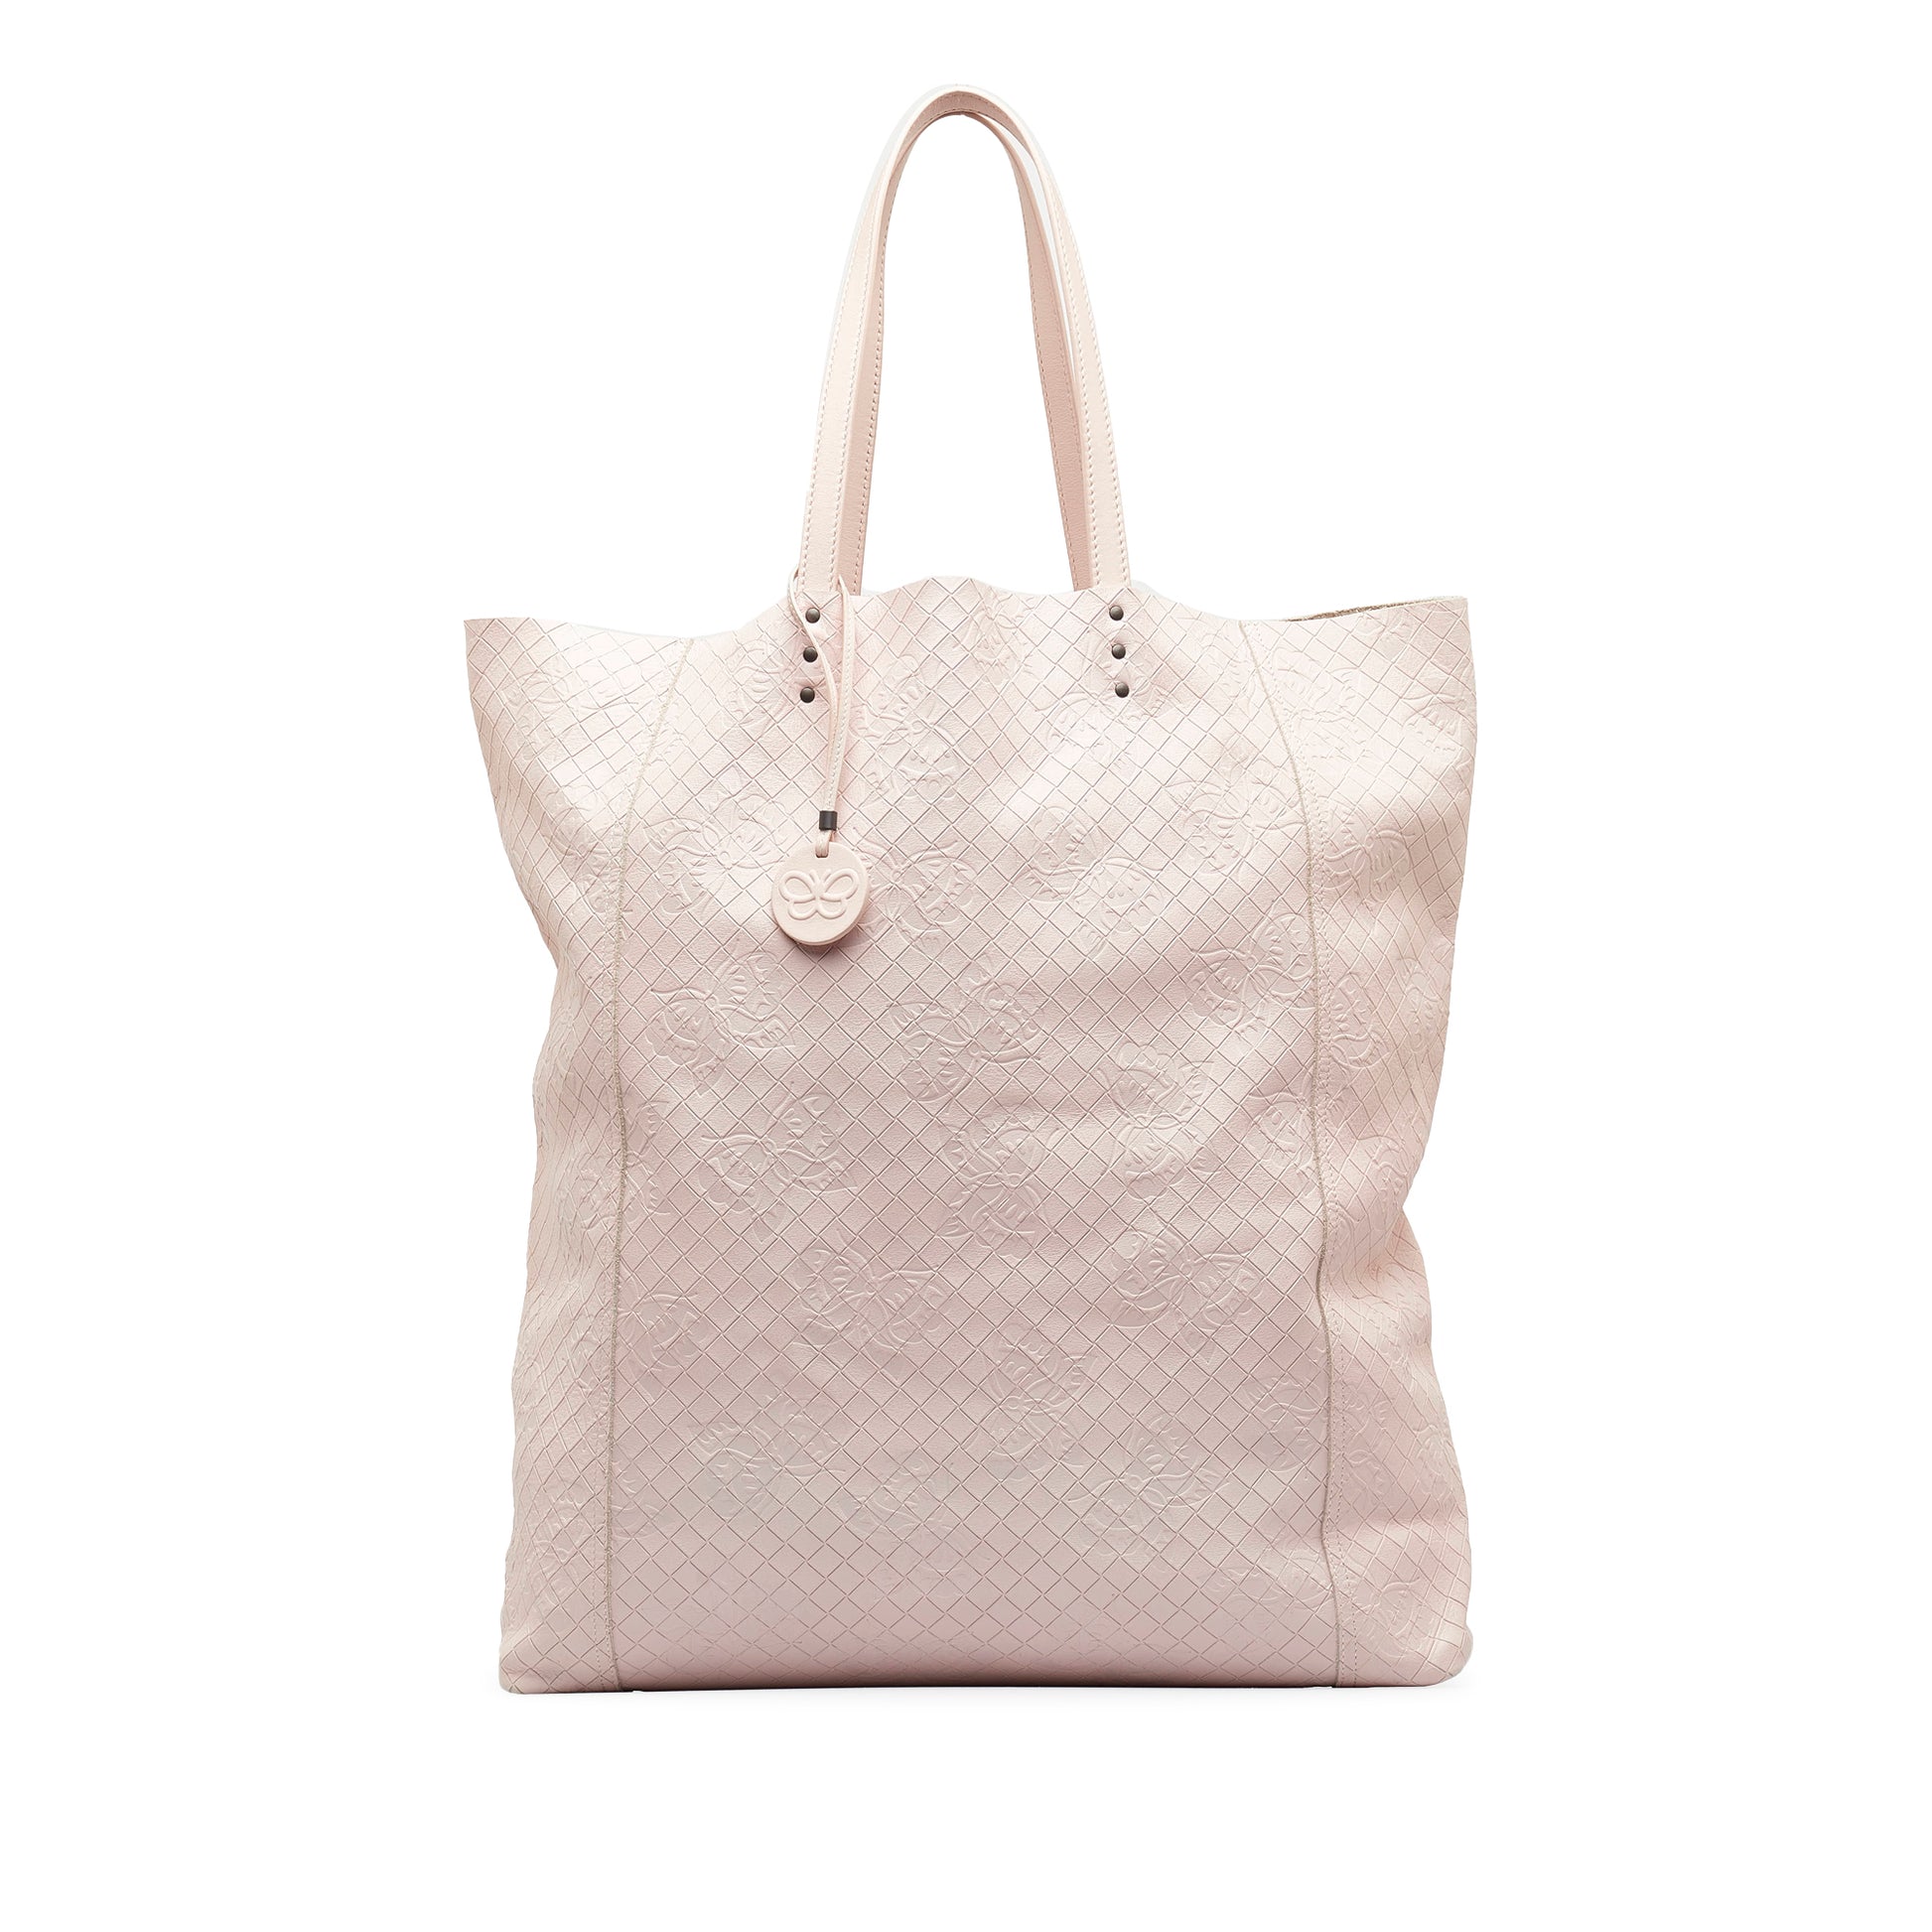 Intrecciomirage Butterfly Tote Pink - Gaby Paris